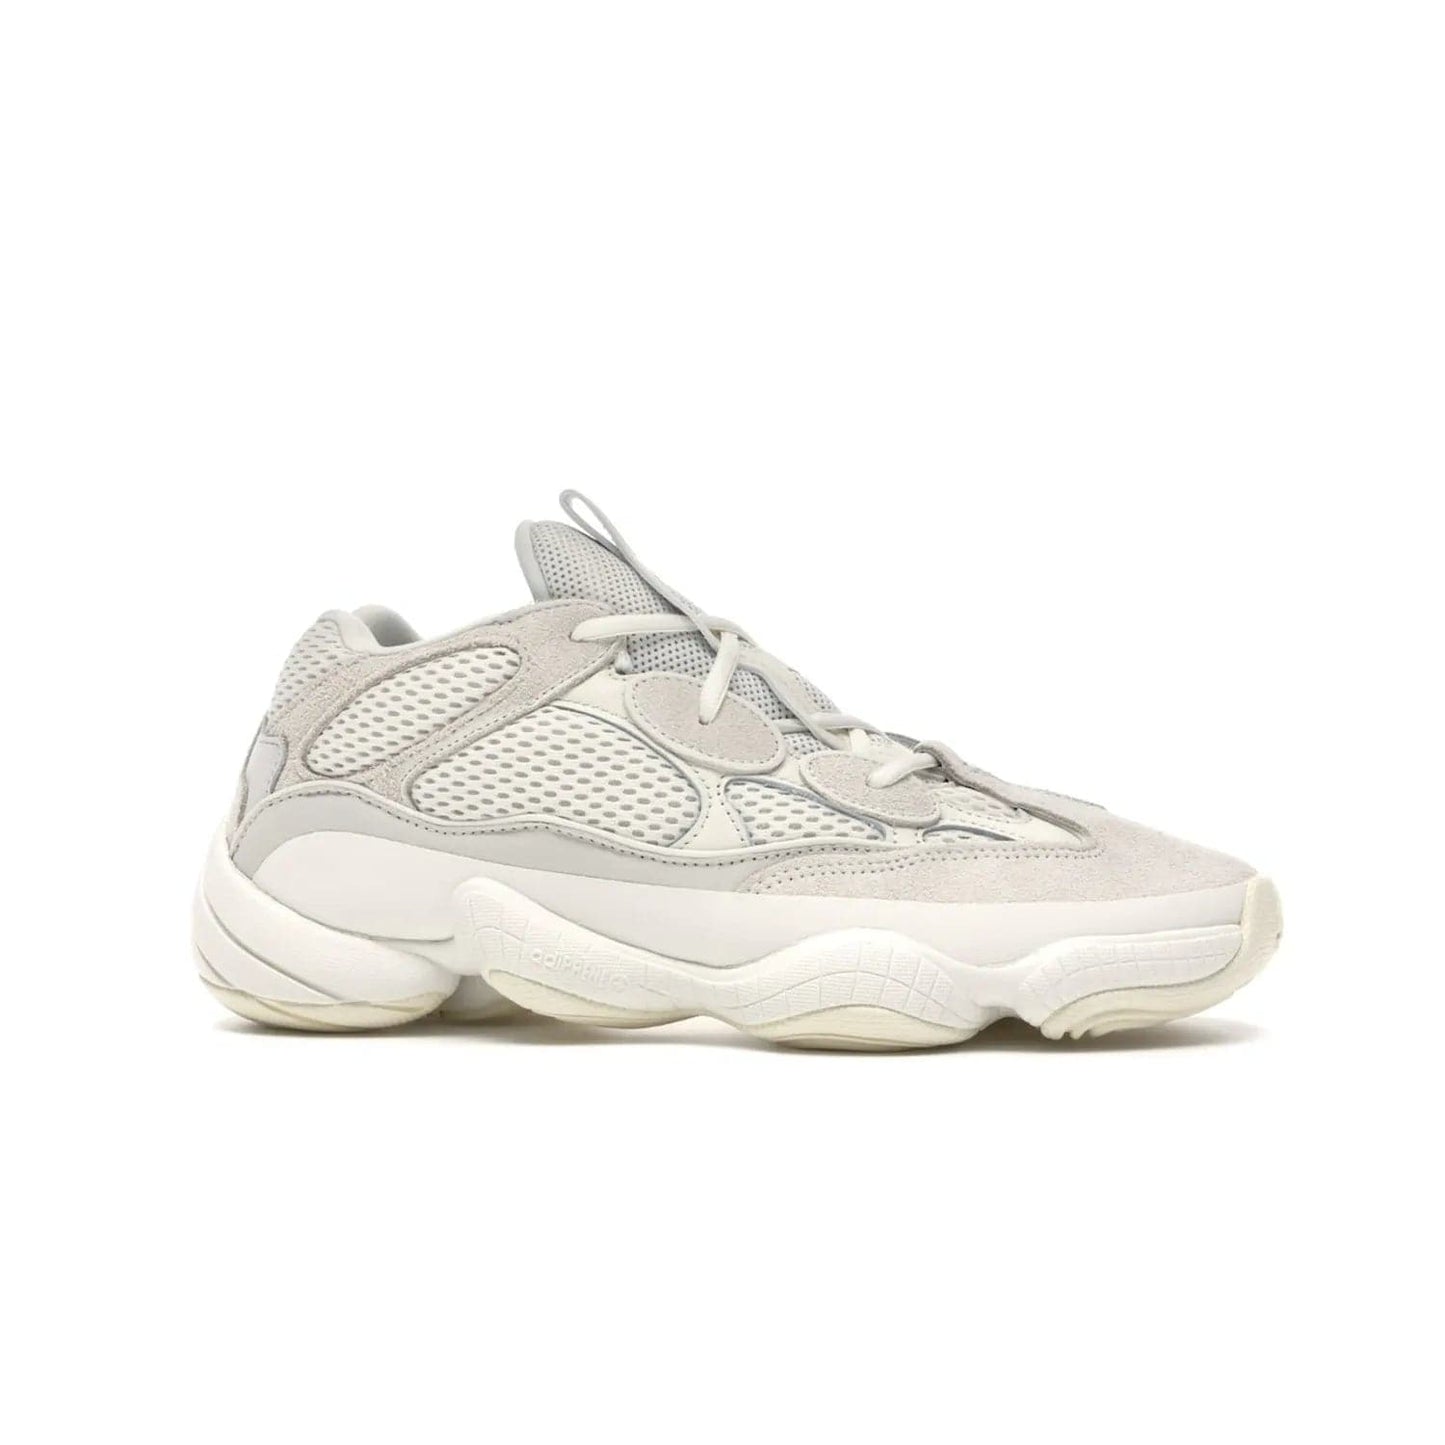 adidas Yeezy 500 Bone White - Image 2 - Only at www.BallersClubKickz.com - Classic look perfect for any sneaker collection. The adidas Yeezy 500 "Bone White" blends a white mesh upper with suede overlays & a chunky midsole inspired by the Adidas KB3. Complimented by a tonal-cream outsole, this timeless style is a must-have.